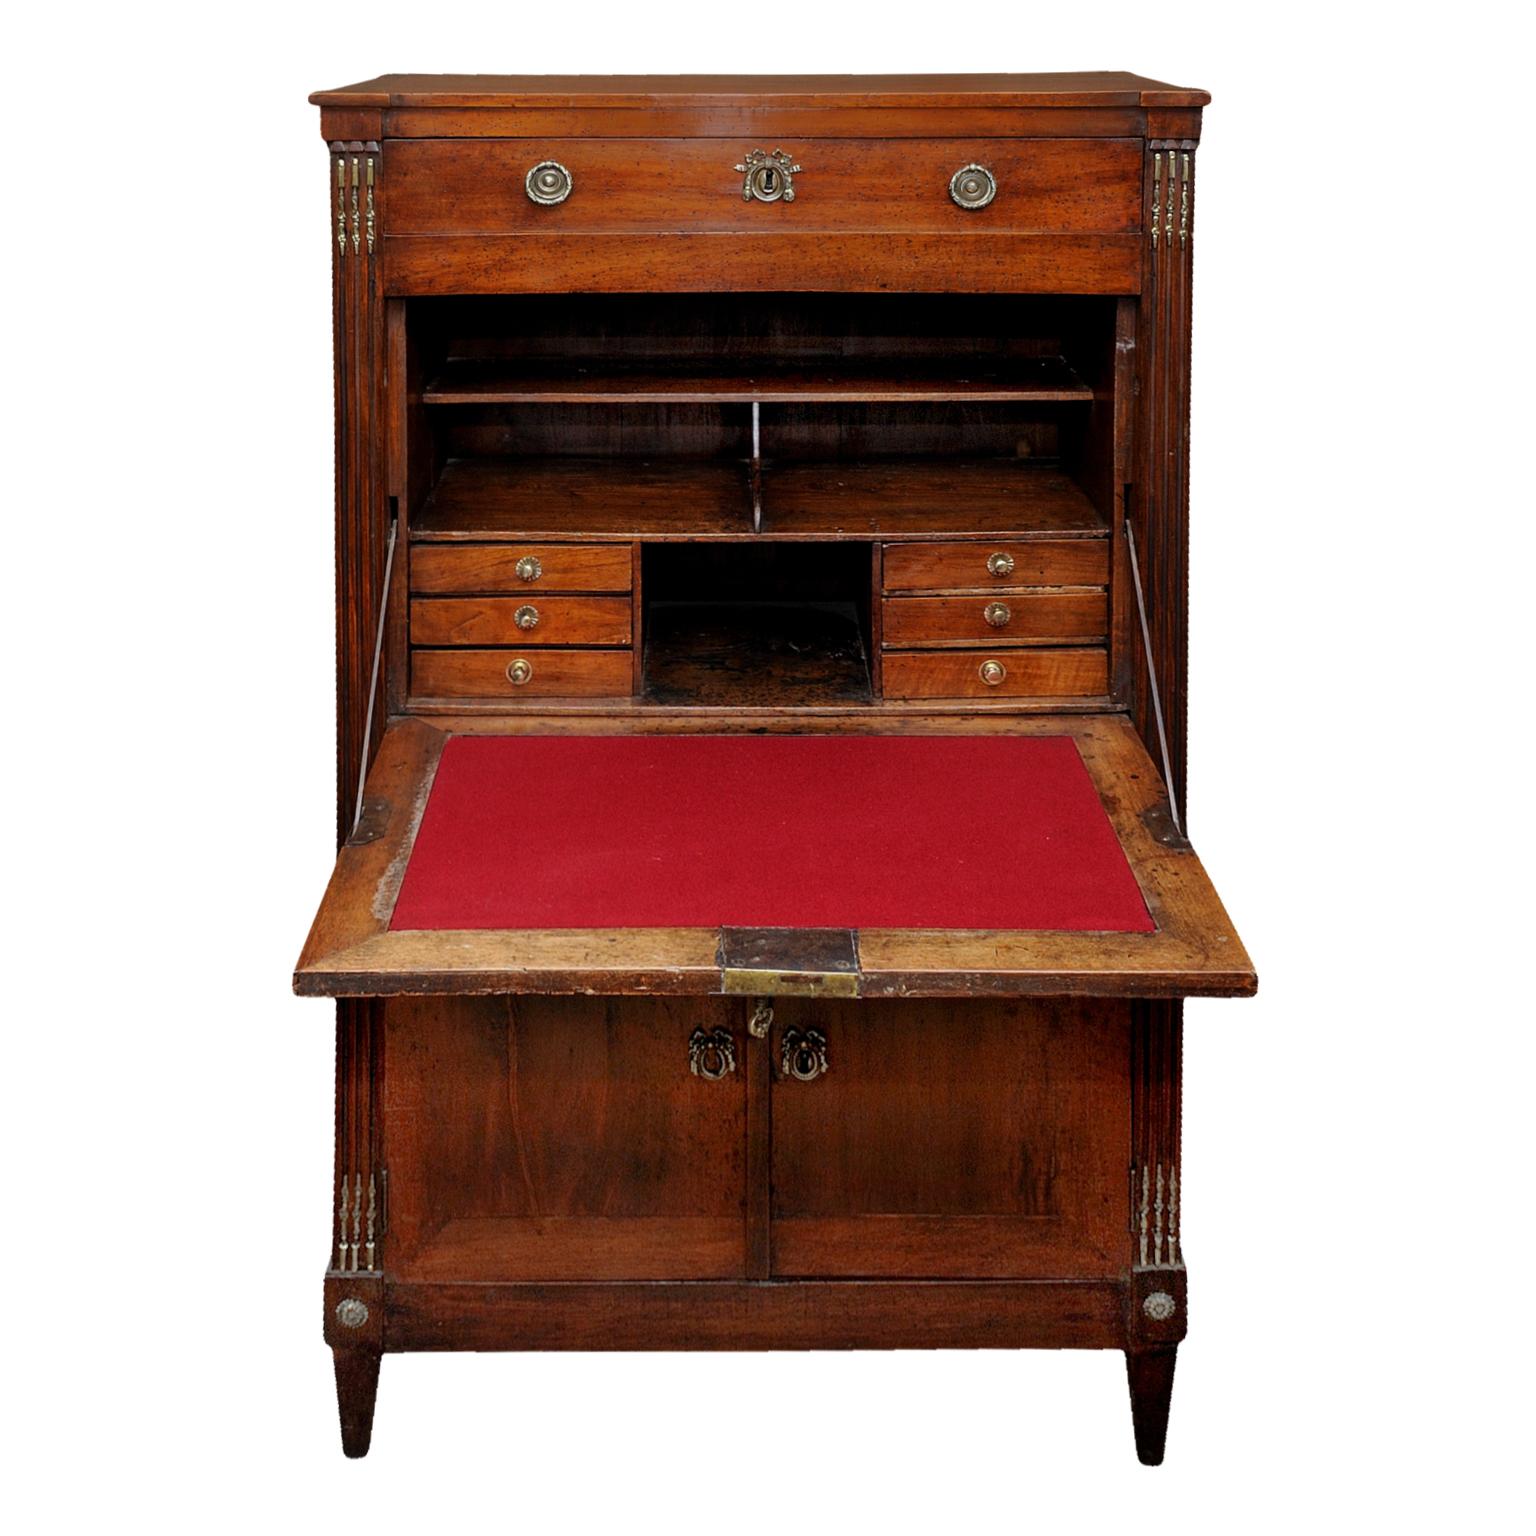 This is a rather stylish French country neoclassical Louis XVI period cherrywood late 18th century Secretaire a Abattant of very useful proportions.
Complete with brass mounts and two-door shelved cupboard below, fitted interior with frieze drawer